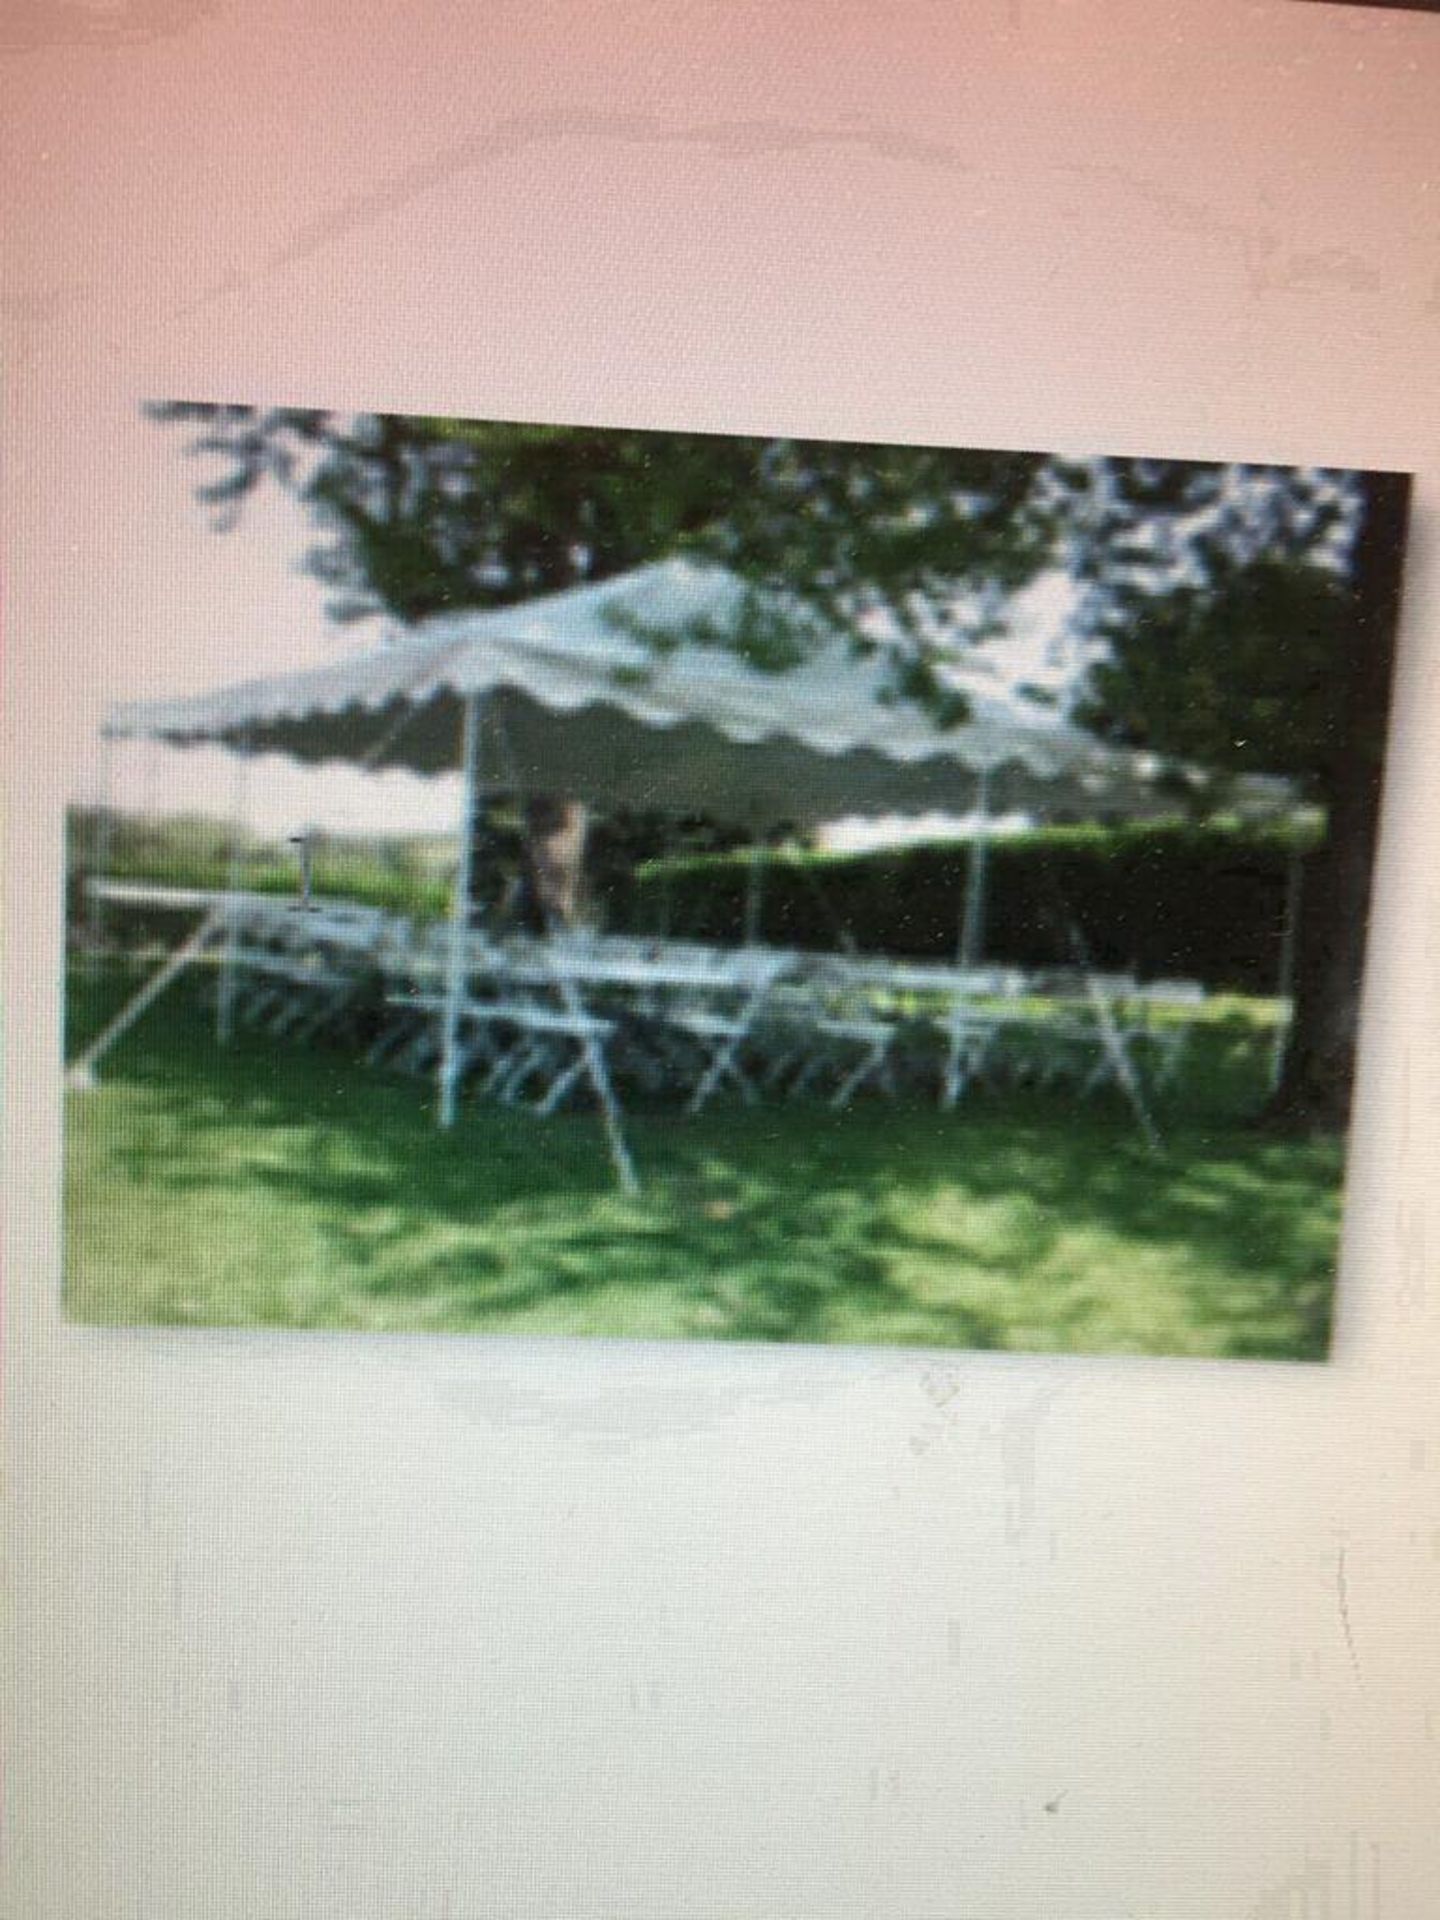 16' x 16' white canopy tent, complete with poles, stakes, and straps etc. - Image 3 of 4